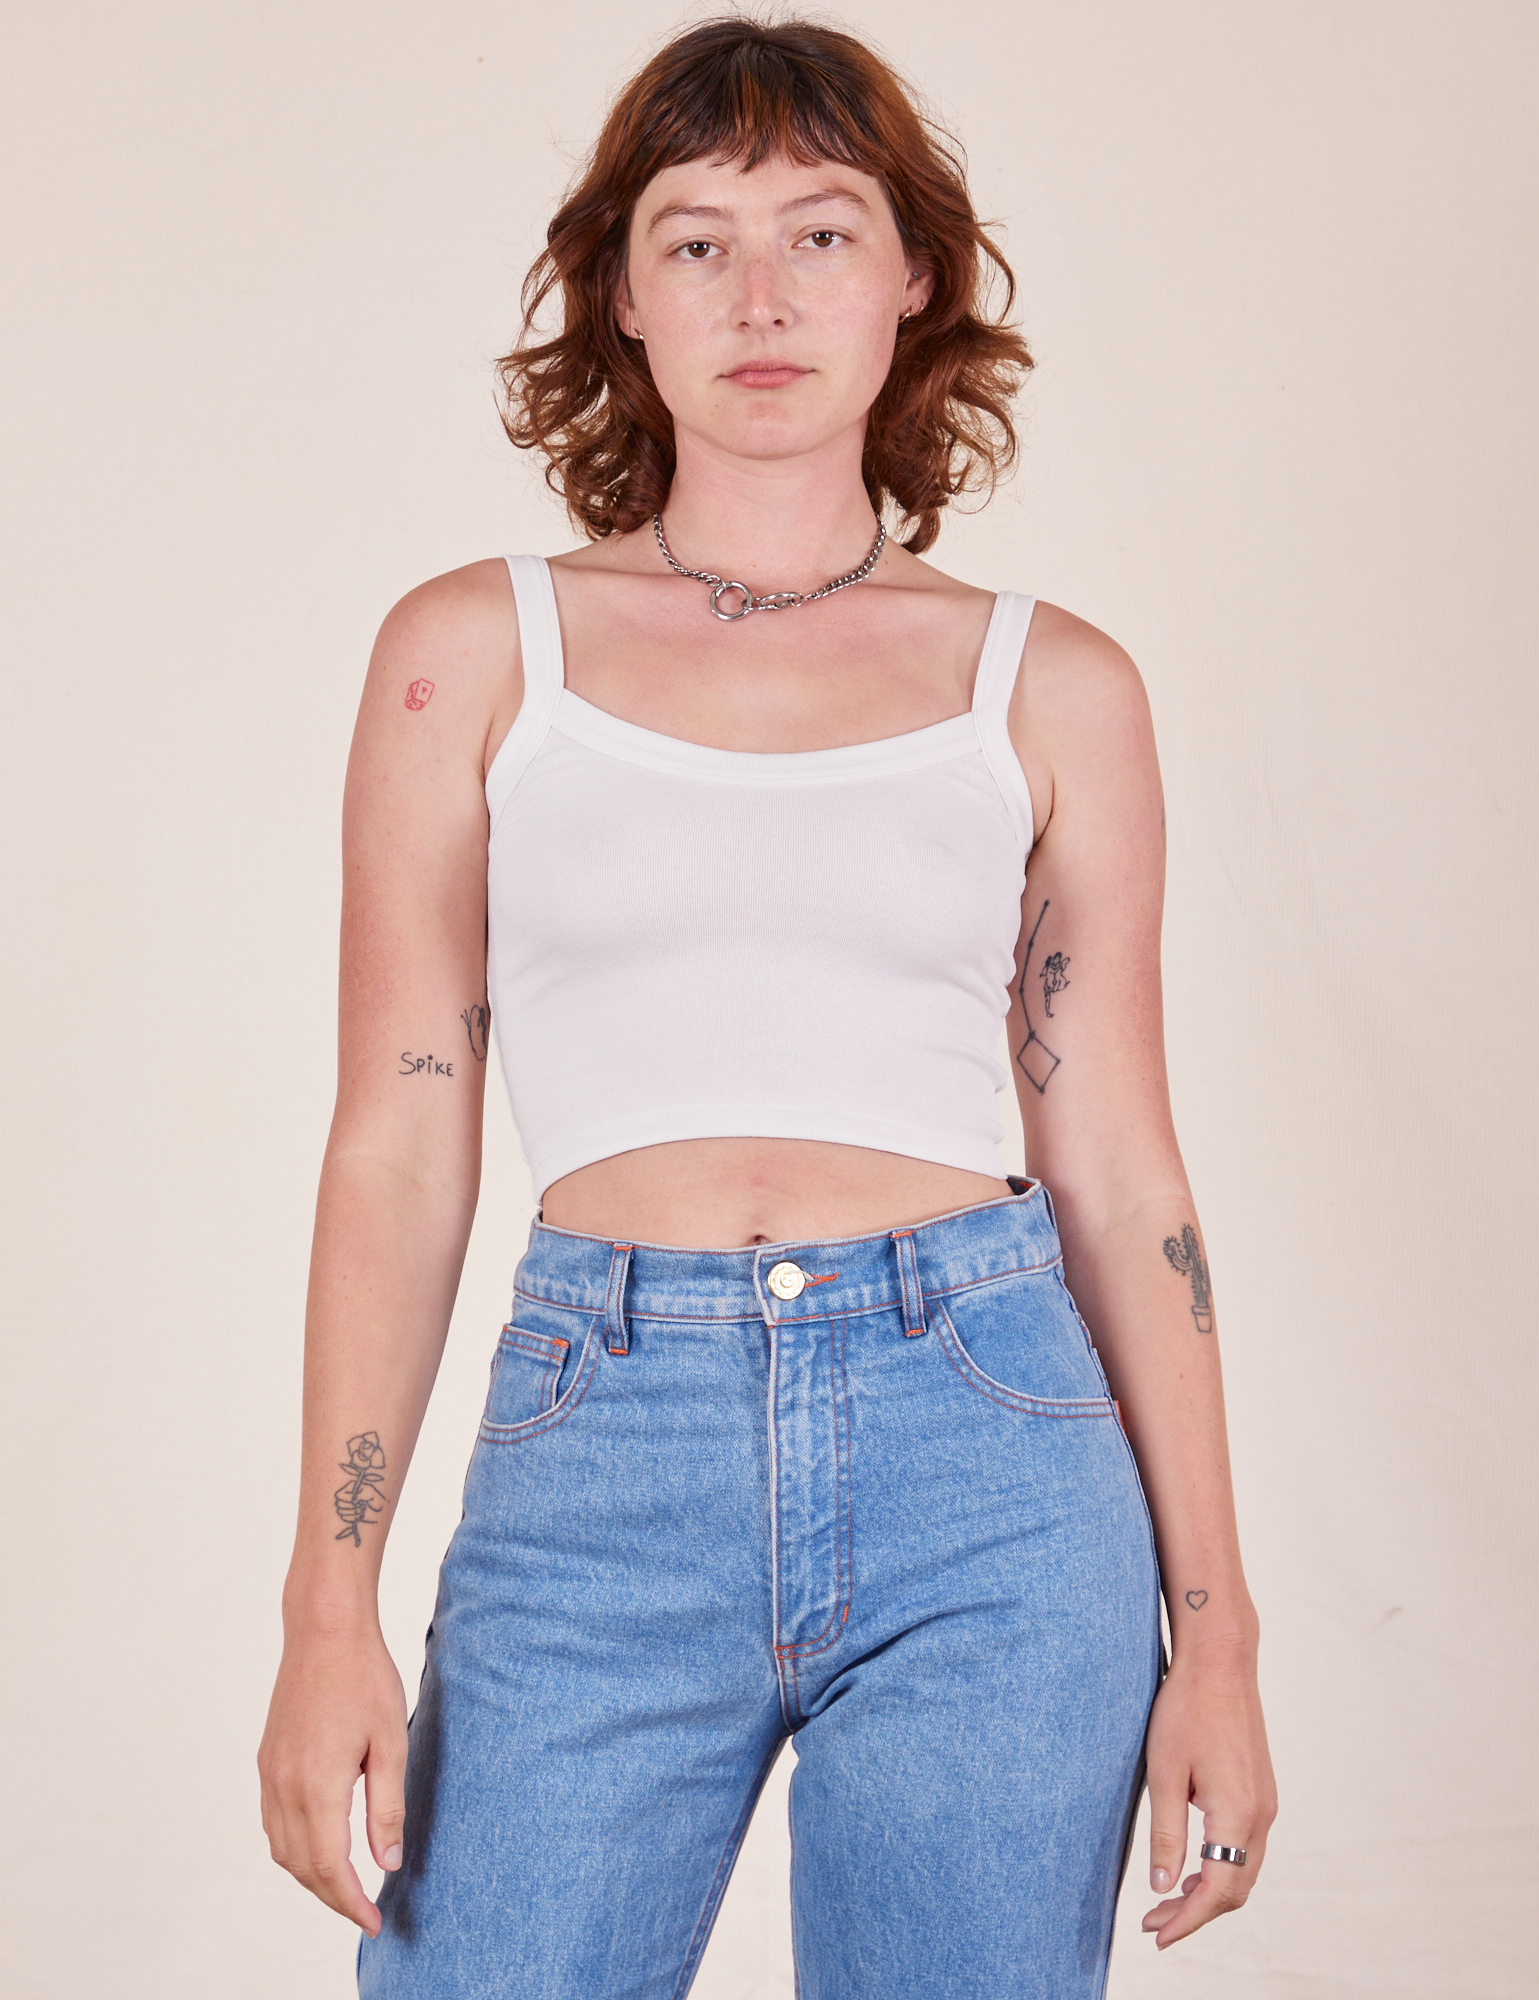 Alex is 5&#39;8&quot; and wearing P Cropped Cami in Vintage Off-White worn with light wash Frontier Jeans